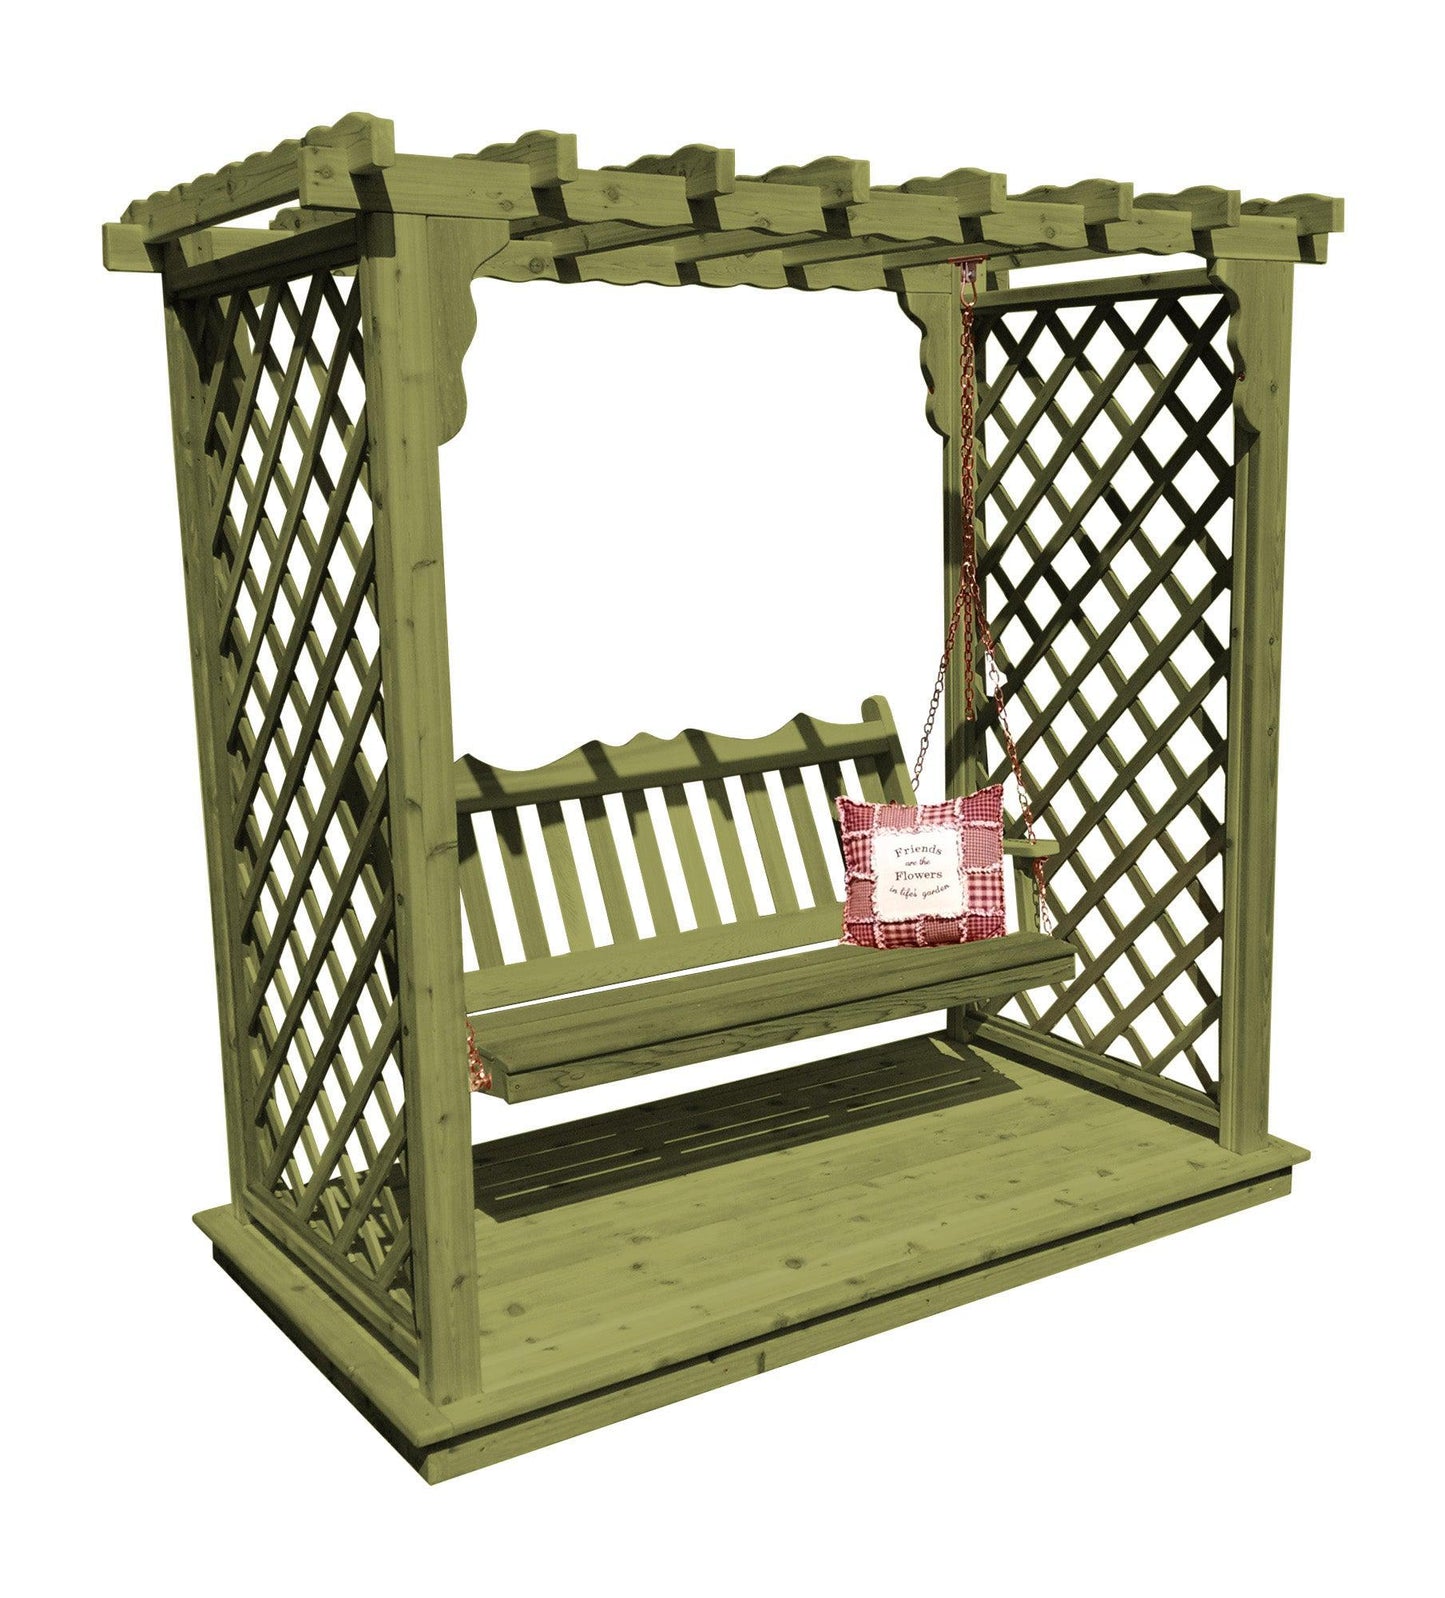 A&L FURNITURE CO. 6' Covington Pressure Treated Pine Arbor w/ Deck & Swing - LEAD TIME TO SHIP 10 BUSINESS DAYS